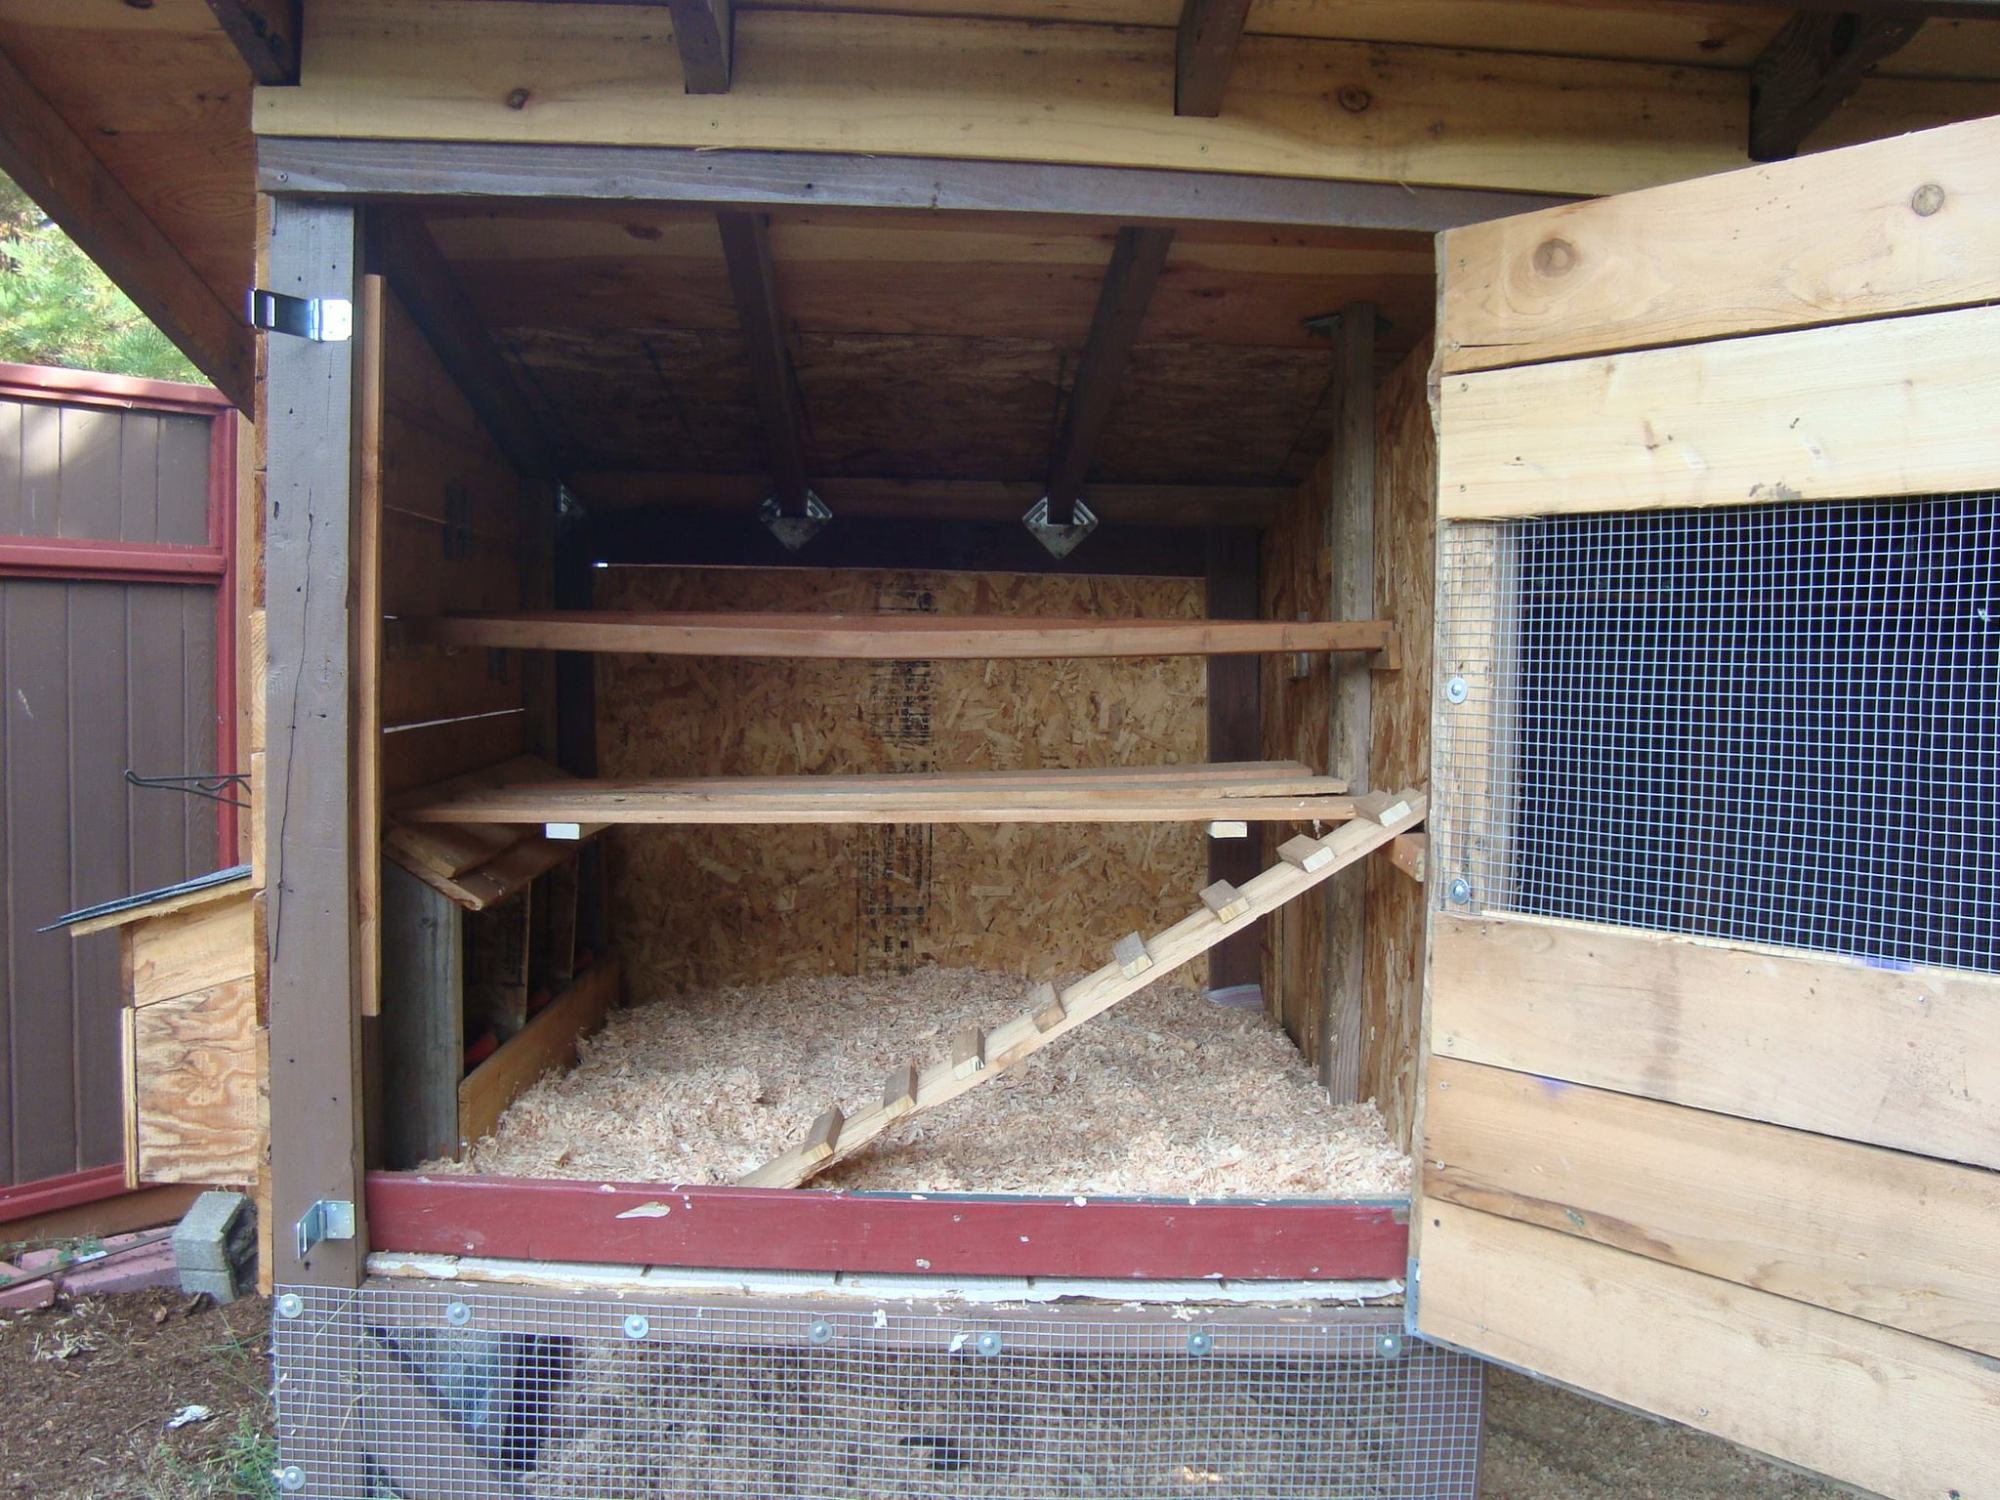 A platform beneath the roosting bars on which to place a light-weight poop board I can slide toward me for daily cleaning. Or until I find something that works better.
The floor is made of exterior siding, exterior side in, and lined with a scrap of vinyl flooring, then wood shavings. Again, end goal is to use sand in here as well.
The red board at the opening lifts out for easy raking out and while in, keeps bedding from falling out.